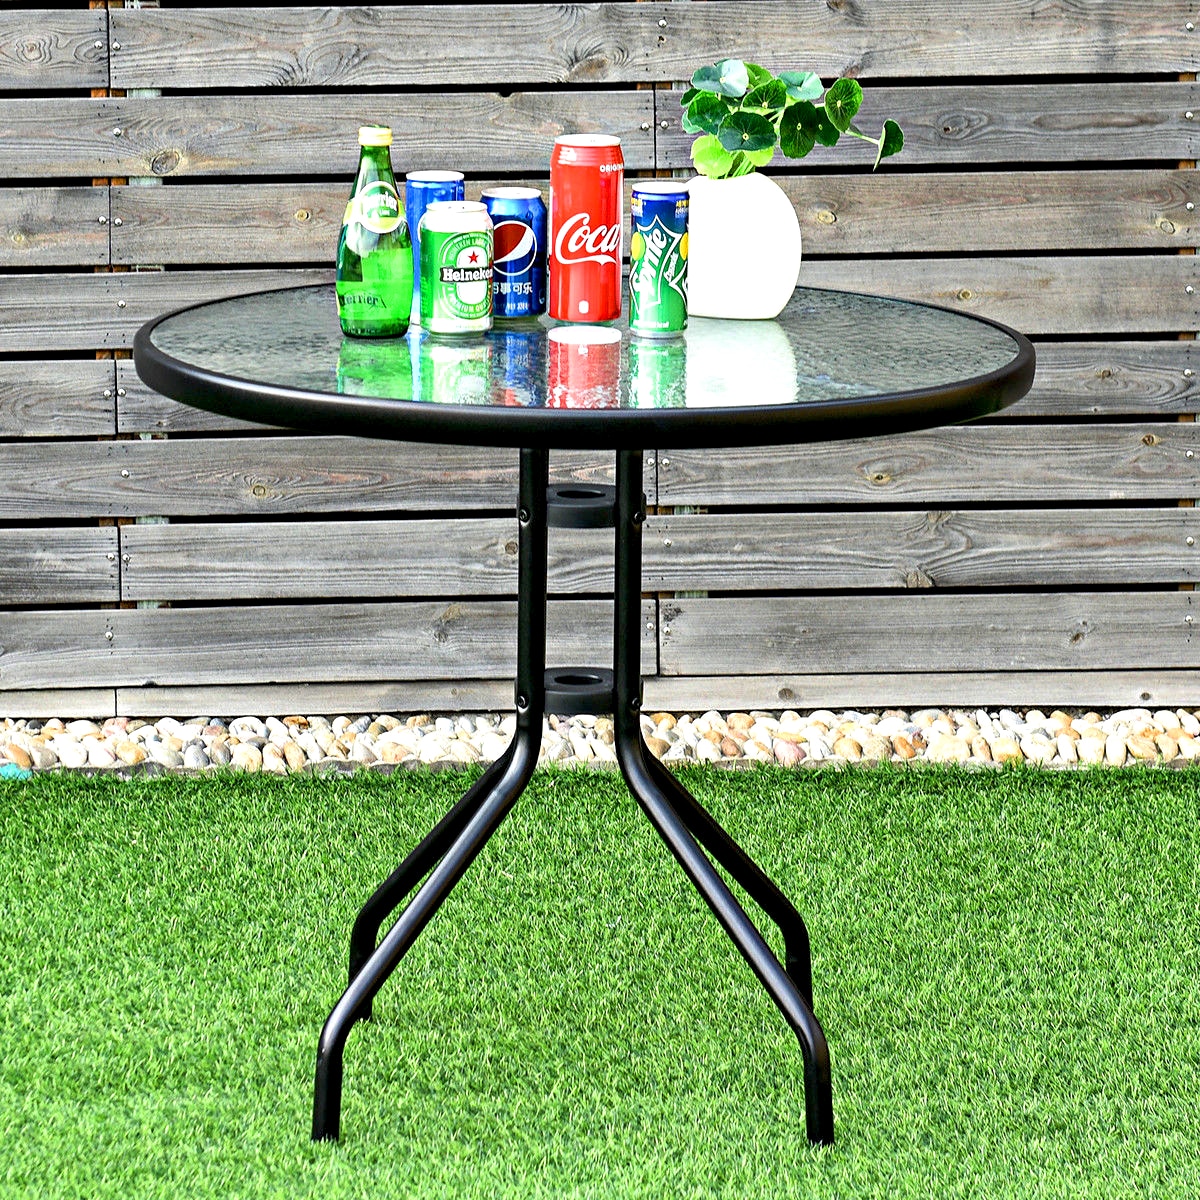 Clihome Round Outdoor Dining Table 32, Glass Top Outdoor Dining Table With Umbrella Hole